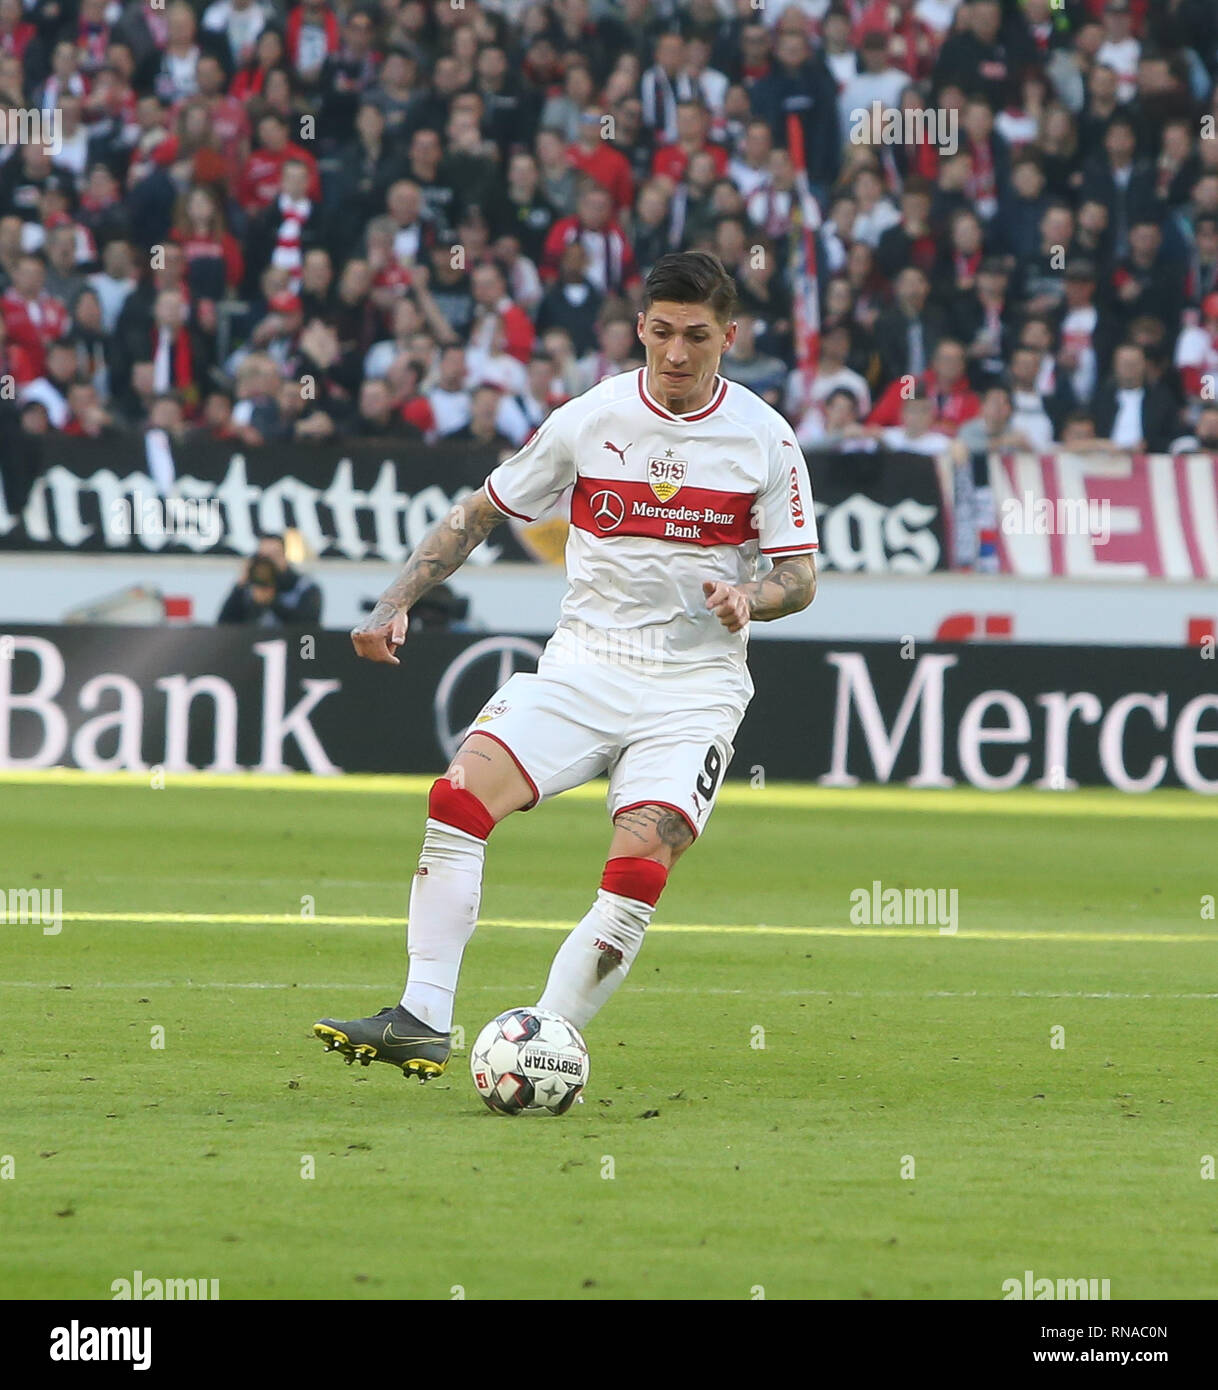 Stuttgart, Deutschland. 16th Feb, 2019. Steven Zuber (VfB). Single action on the ball. VfB Stuttgart-RB Leipzig. Stuttgart, GER, 16.02.2019, 22nd matchday Football Bundesliga 2018-2019. Credit: Avanti/Ralf Boller OB. According to the specifications of the DFL German Football League, it is forbidden to use or process photo shoots in the stadium and/or the game in the form of sequence pictures and/or video-like photo series. | usage worldwide/dpa/Alamy Live News Stock Photo